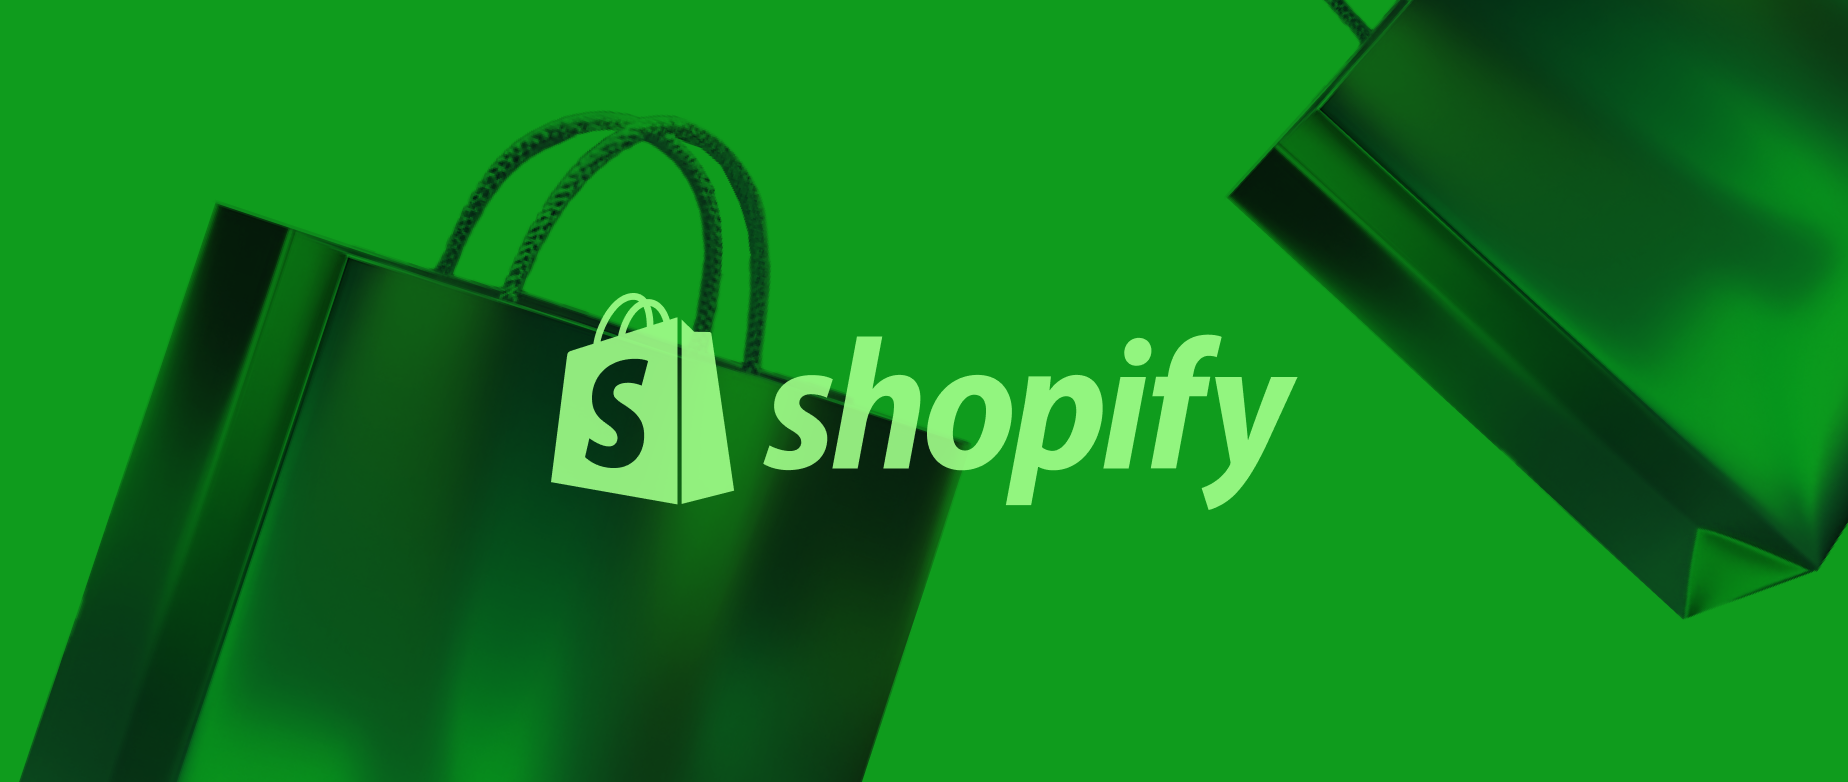 The Shopify logo is placed over an image of shopping bags floating